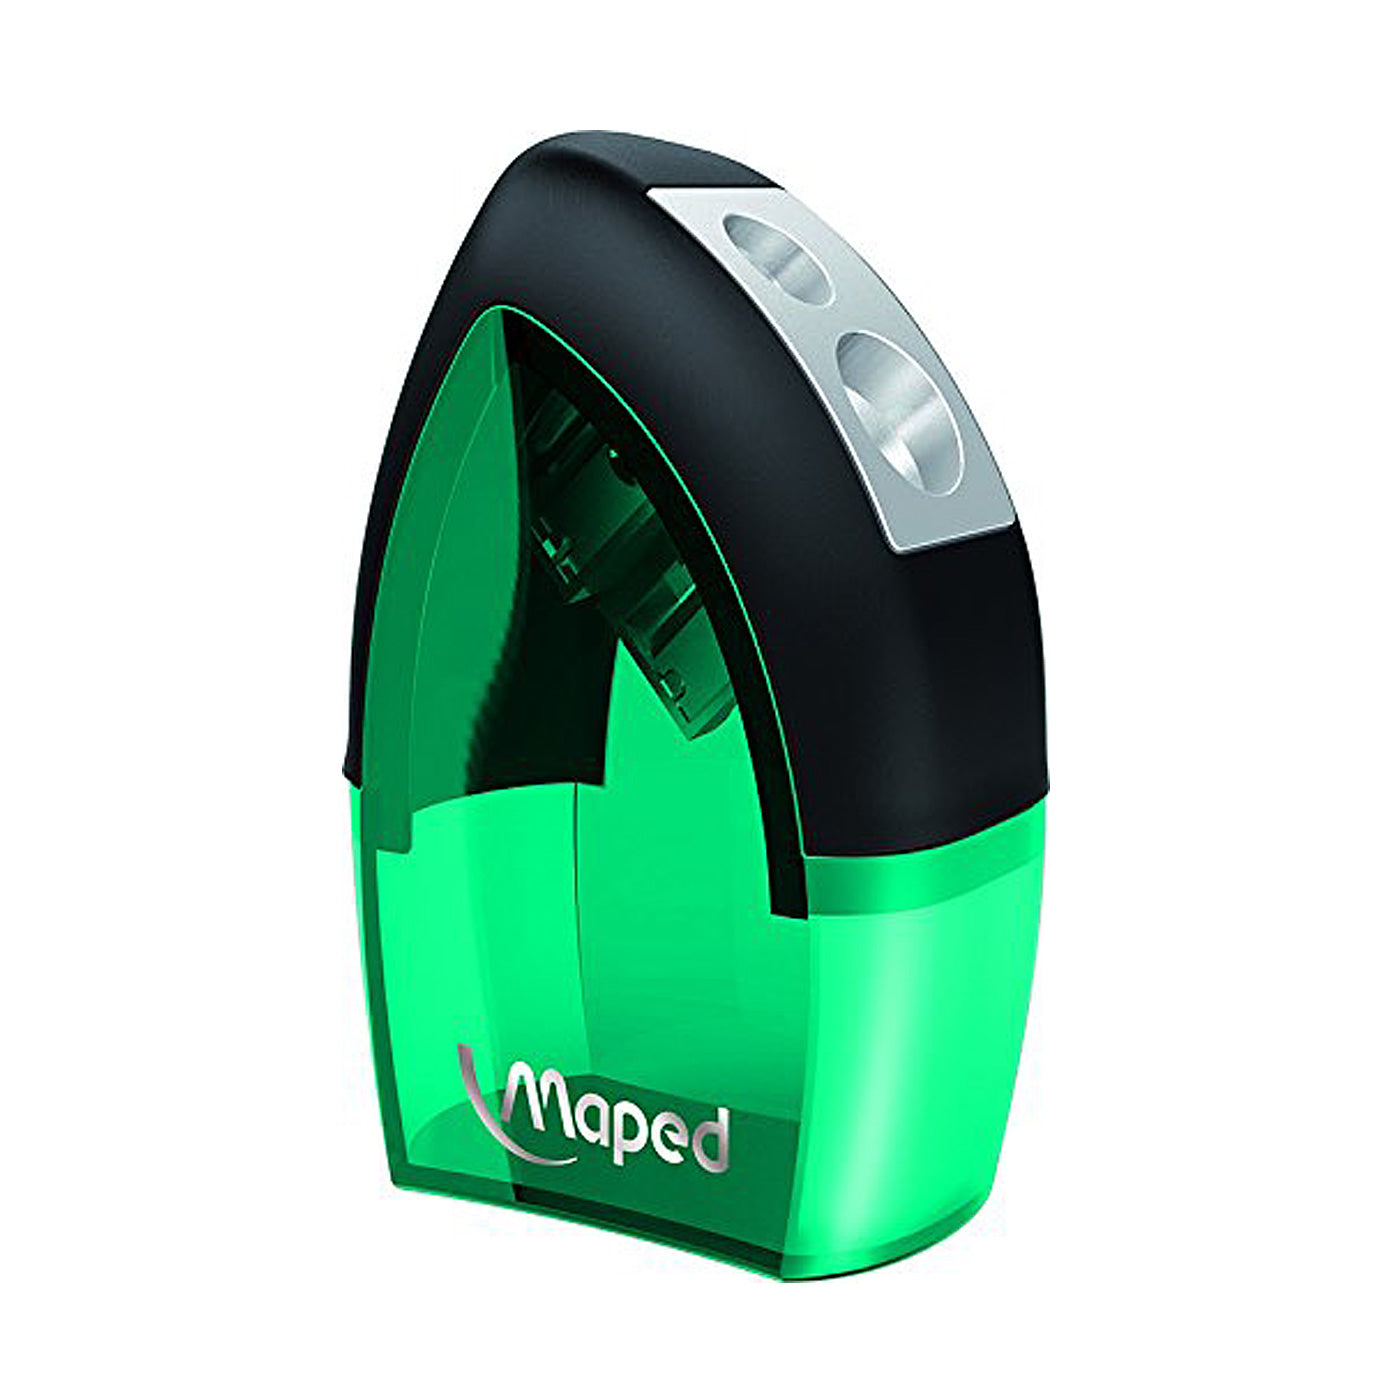 Maped Pencil Sharpener Double Hole Tonic Green